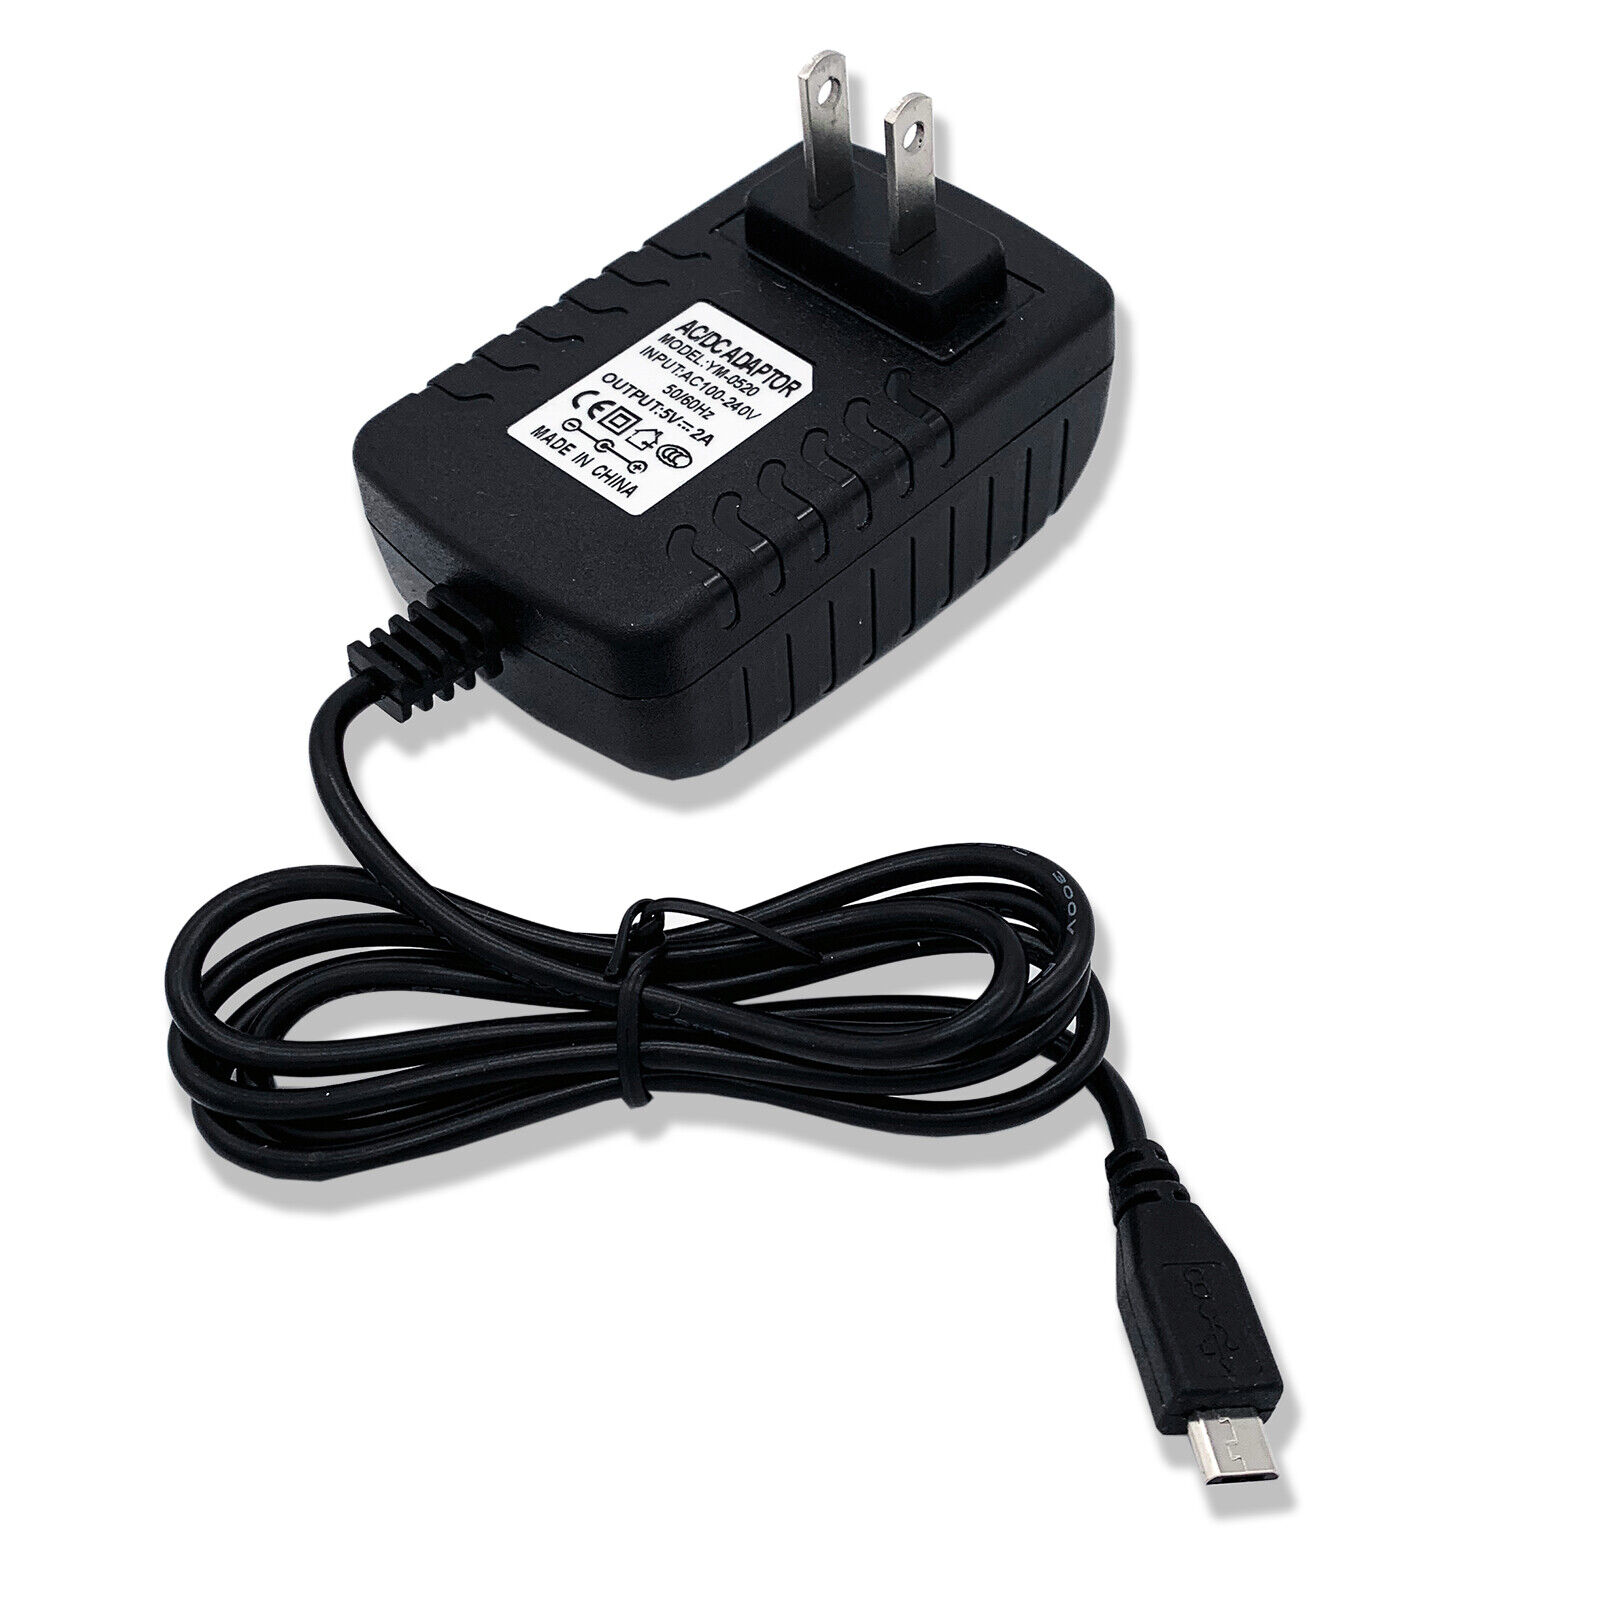 AC Adapter Charger For Asus Transformer Book T100 T100TA T100TAM T100TAF T100HA Unbranded/Generic Does Not Apply